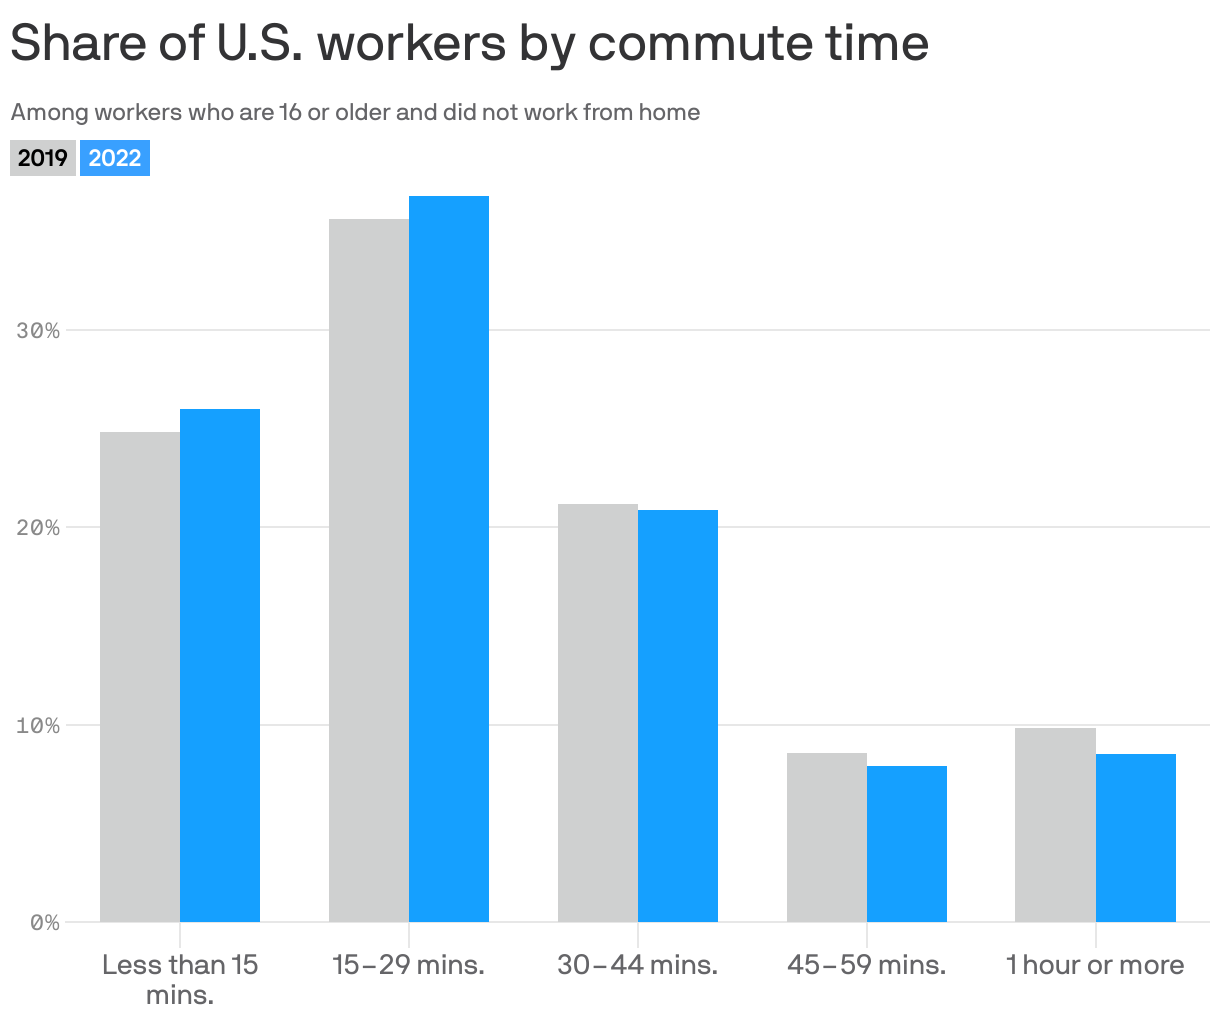 Share of U.S. workers by commute time